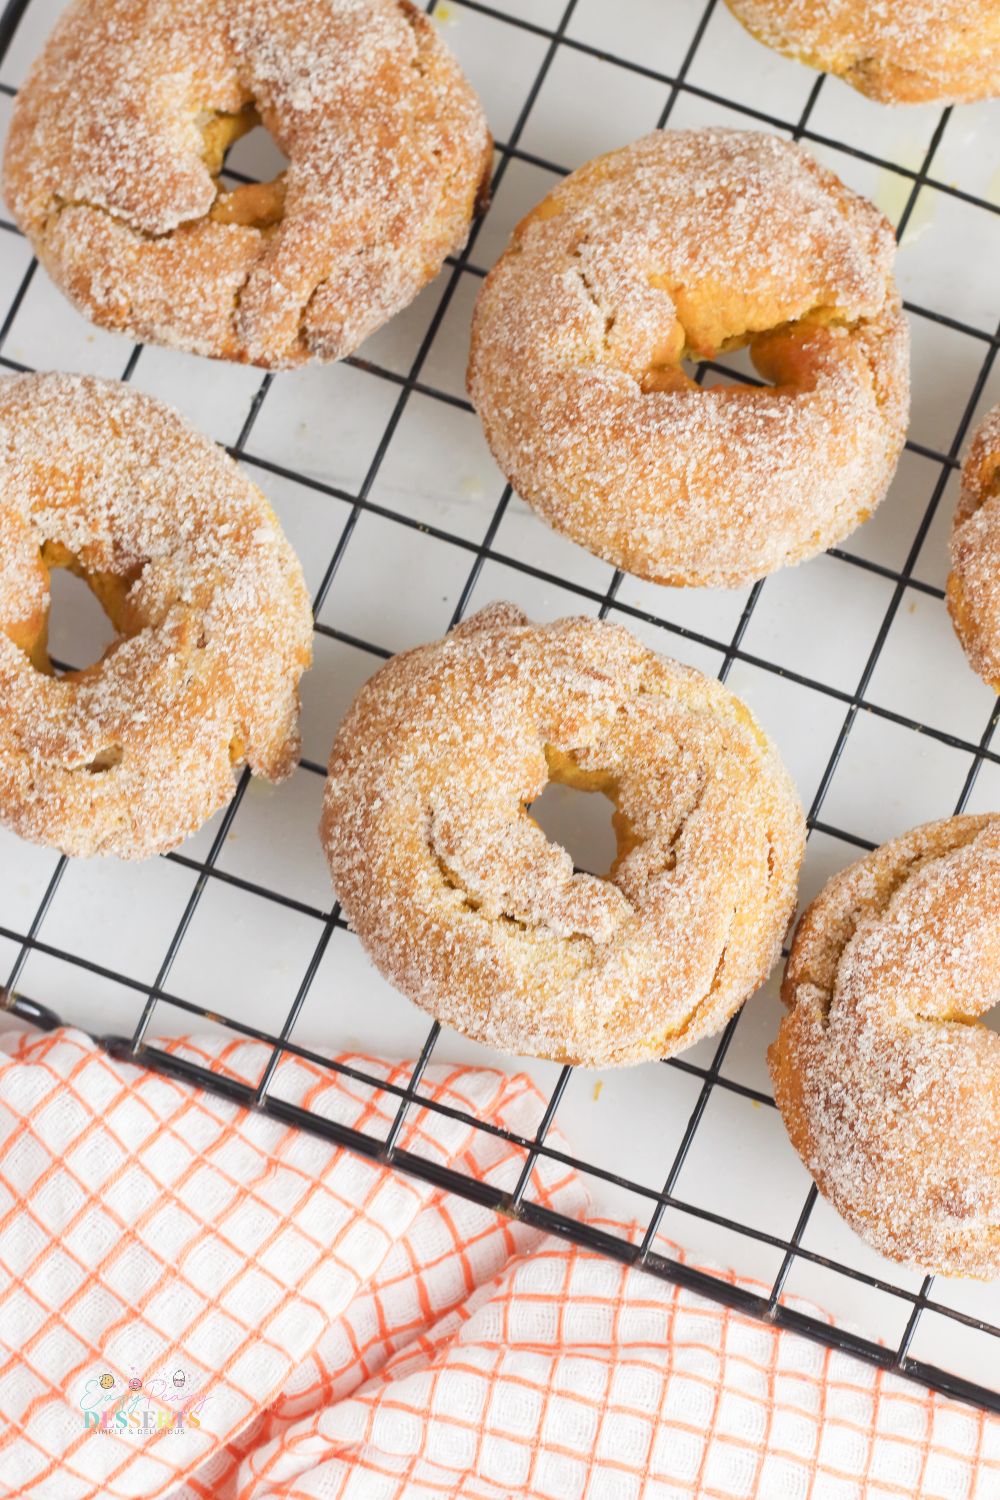 Air fryer donuts on a cooling rack next to a checkered napkin